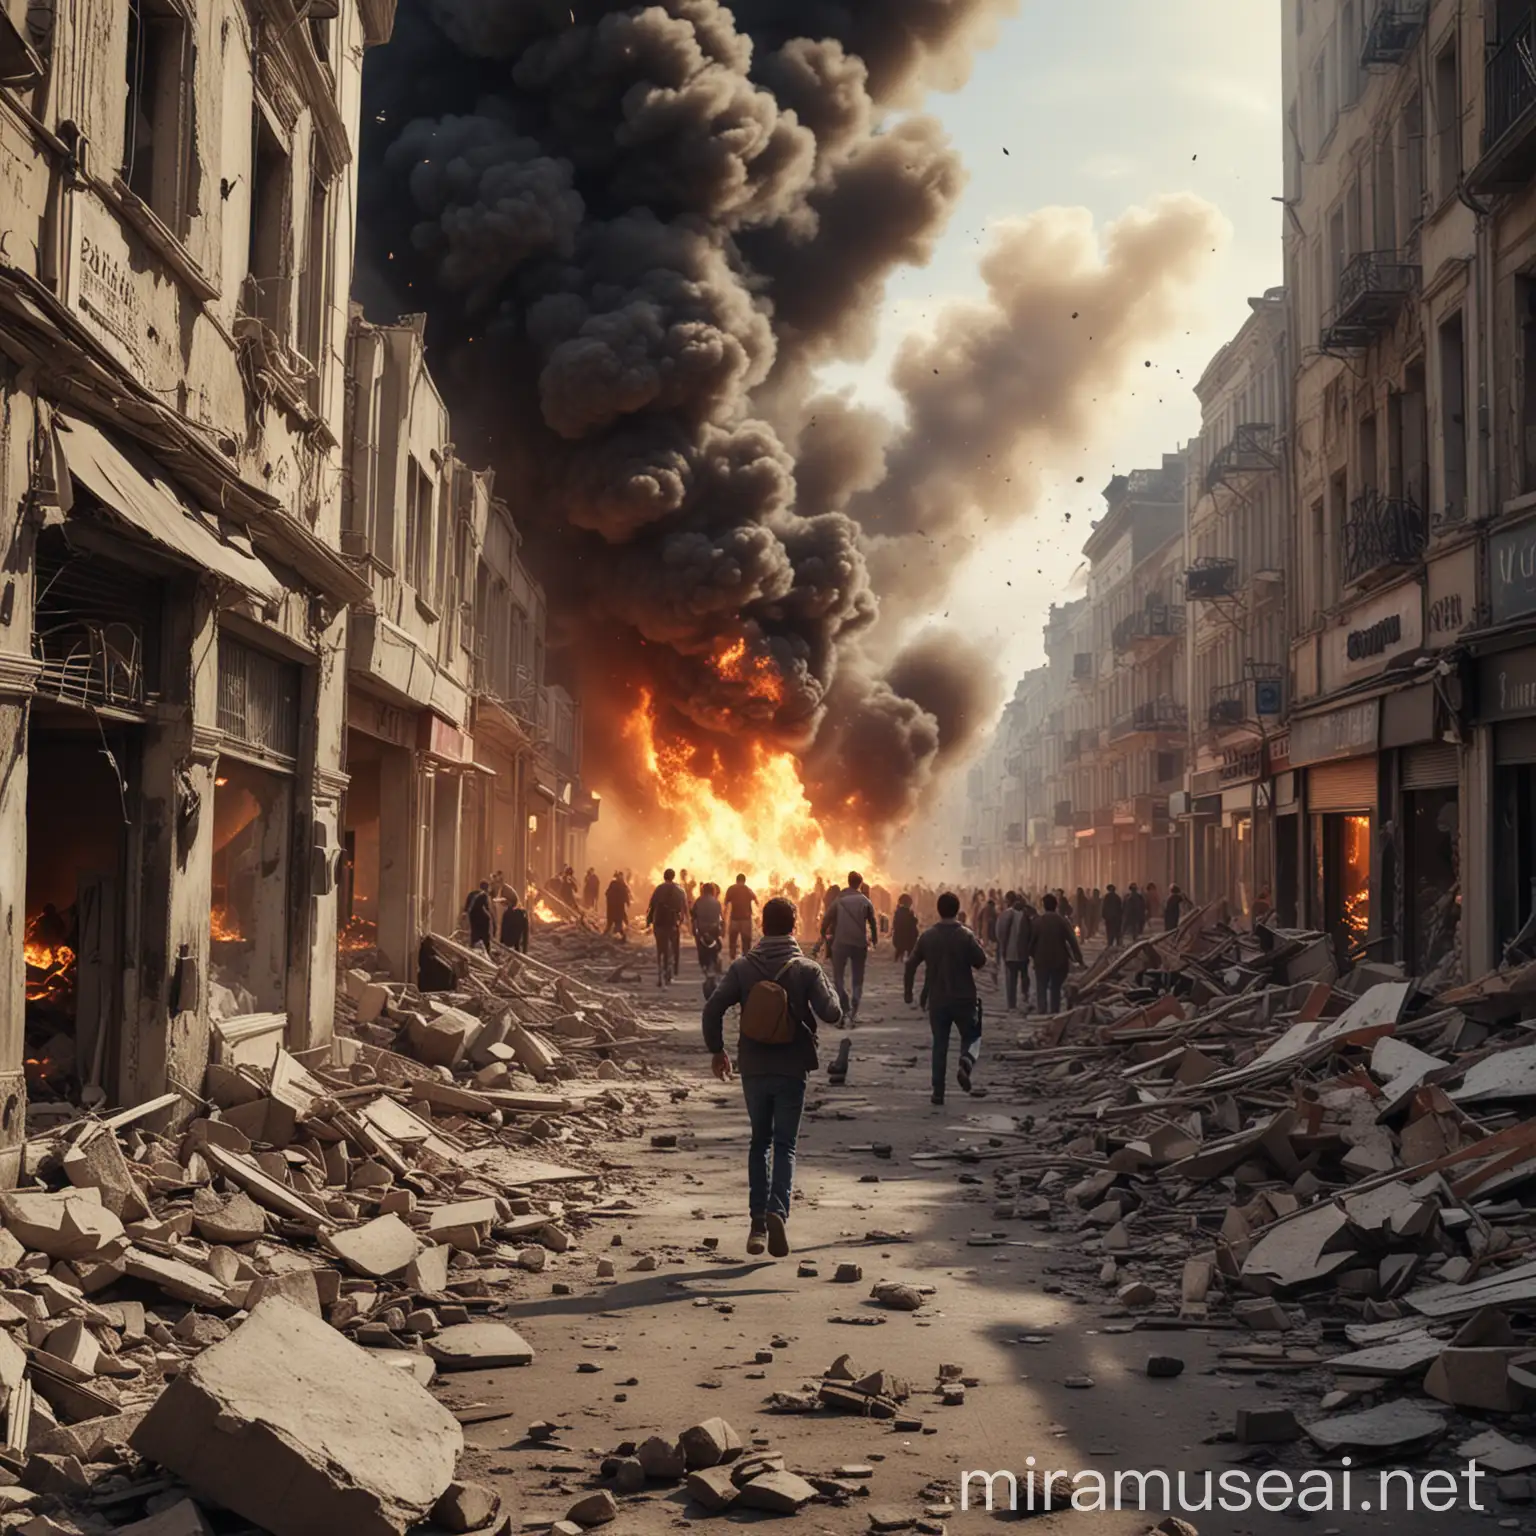 Rubble of a shop in a chaotic city, dazed person standing, people running and screaming, buildings on fire, multiple explosions, uninjured person amidst debris
